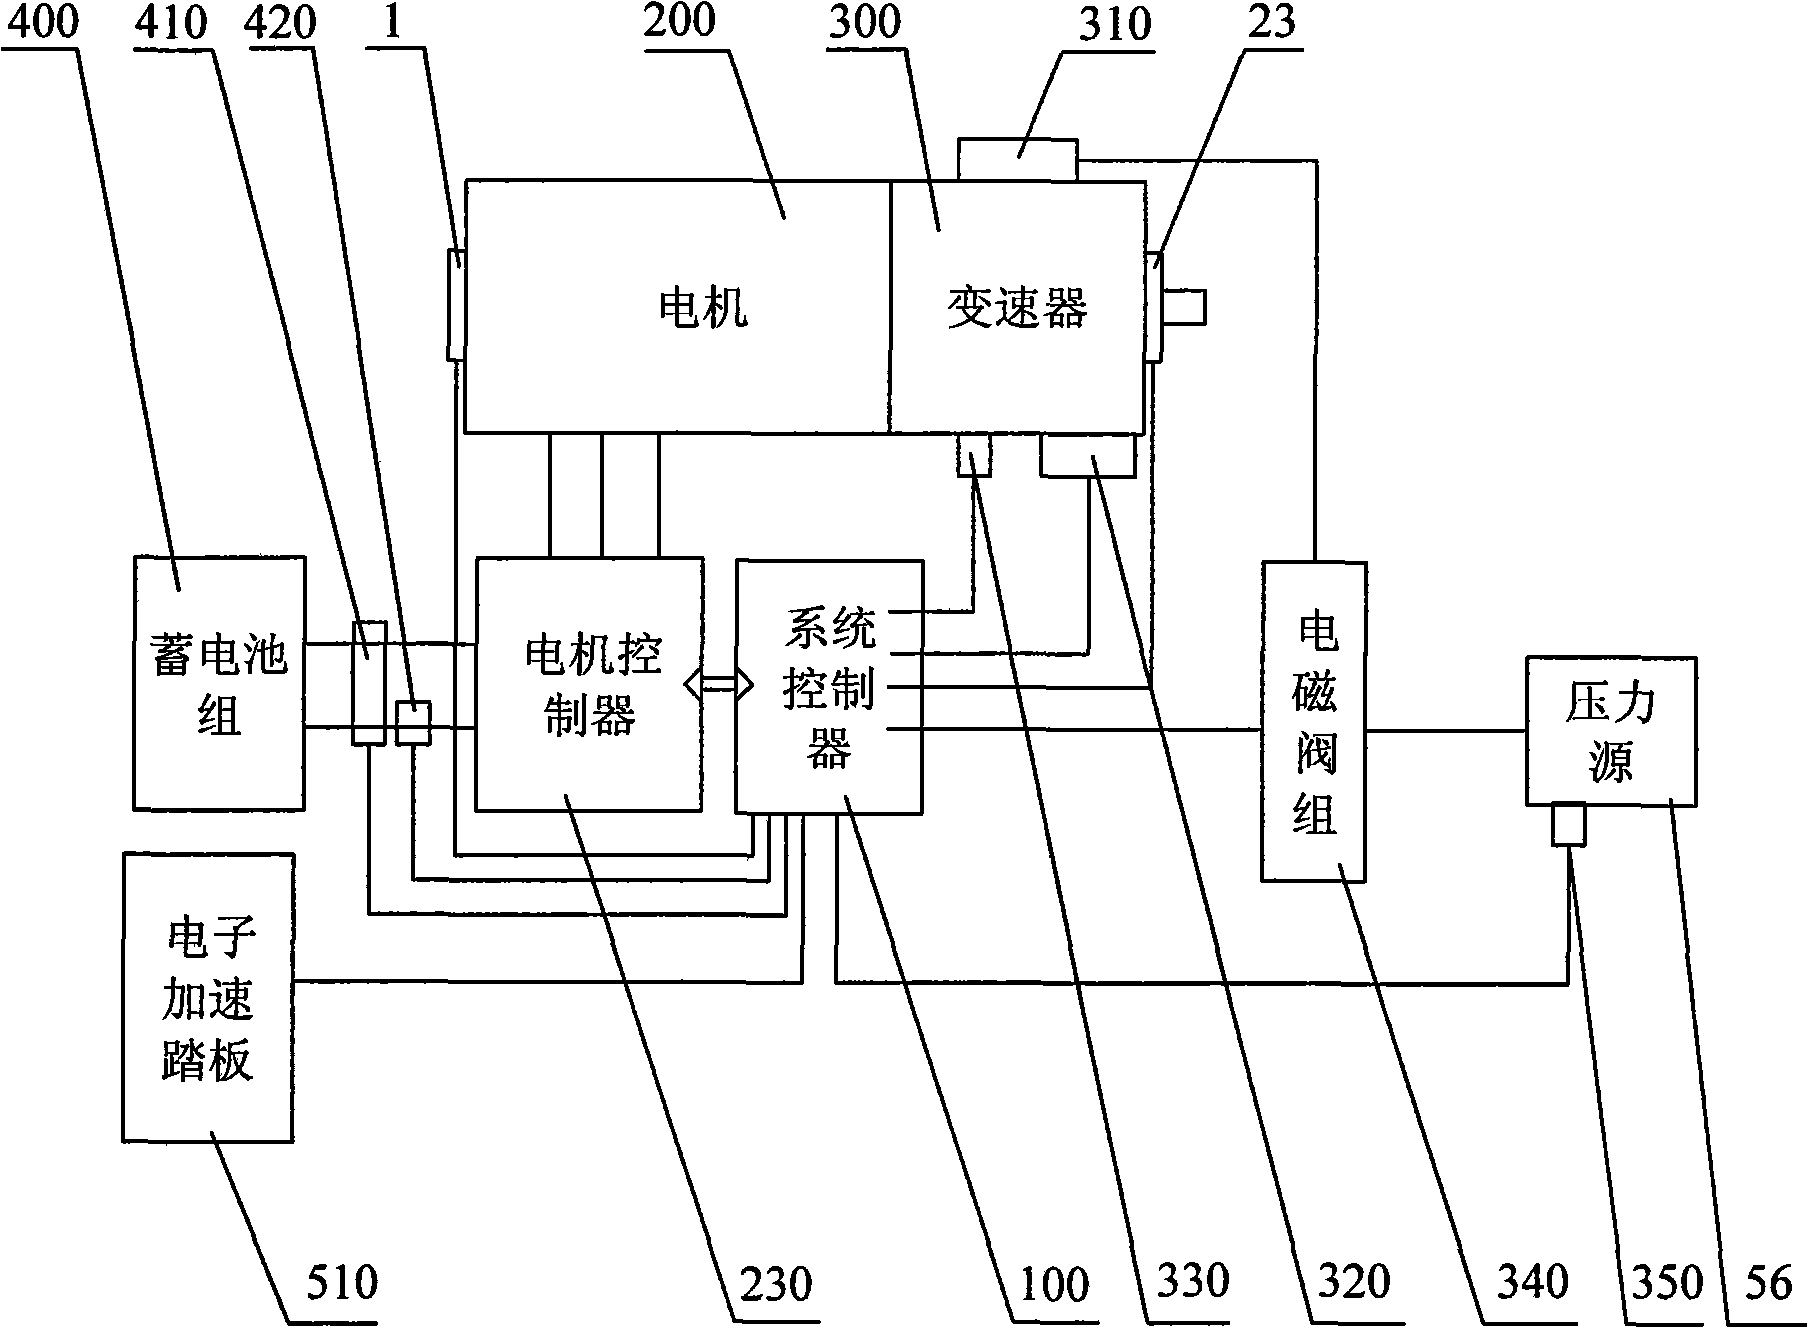 Automatic gear shifting control system of motor in electric automobile